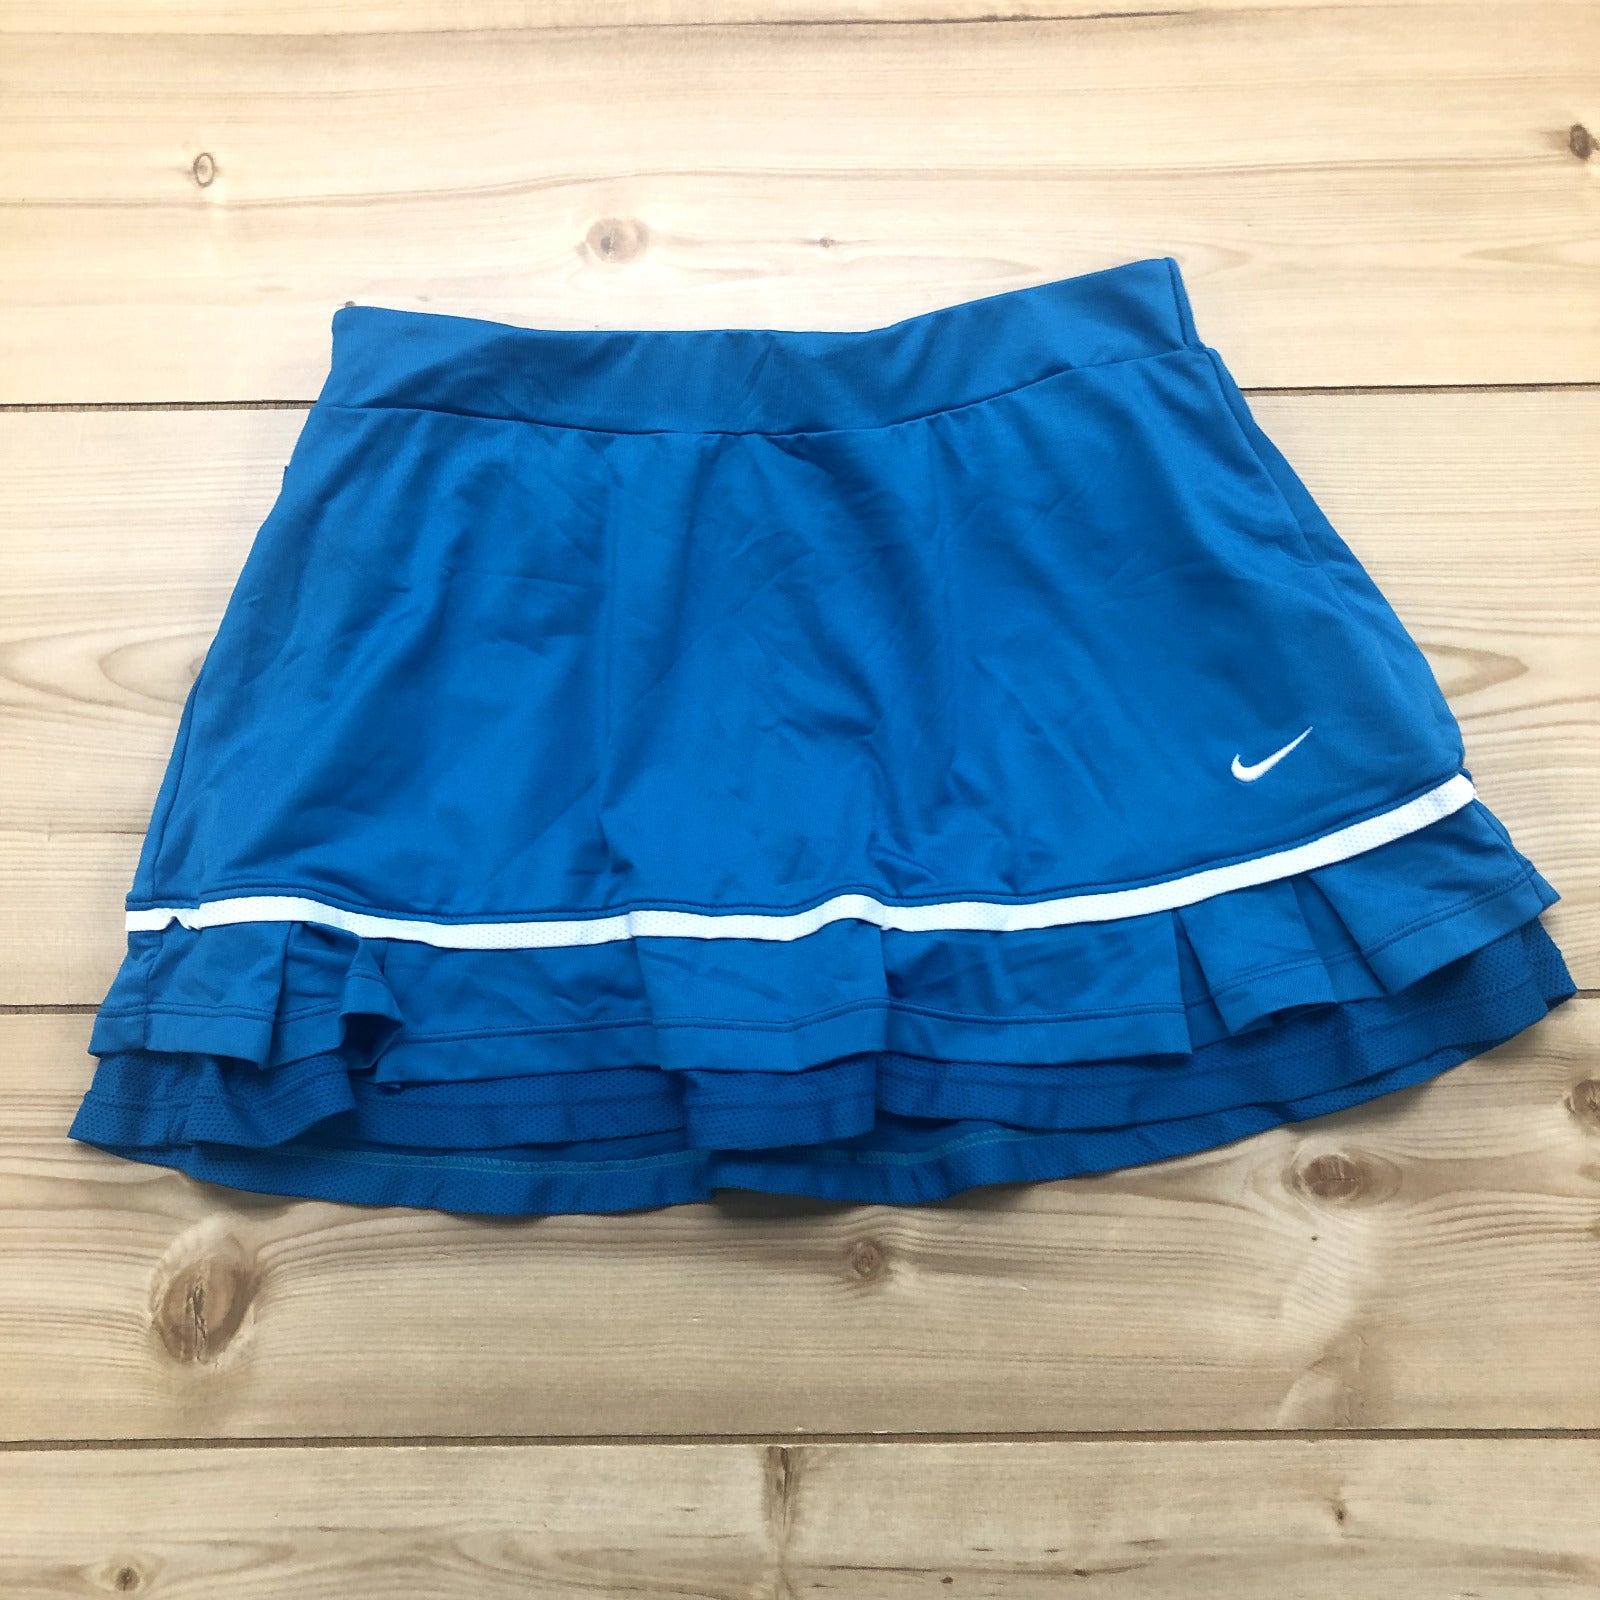 Nike Turquoise Dri - Fit Stretch Tennis Gym Activewear Short Skort Womens Size S